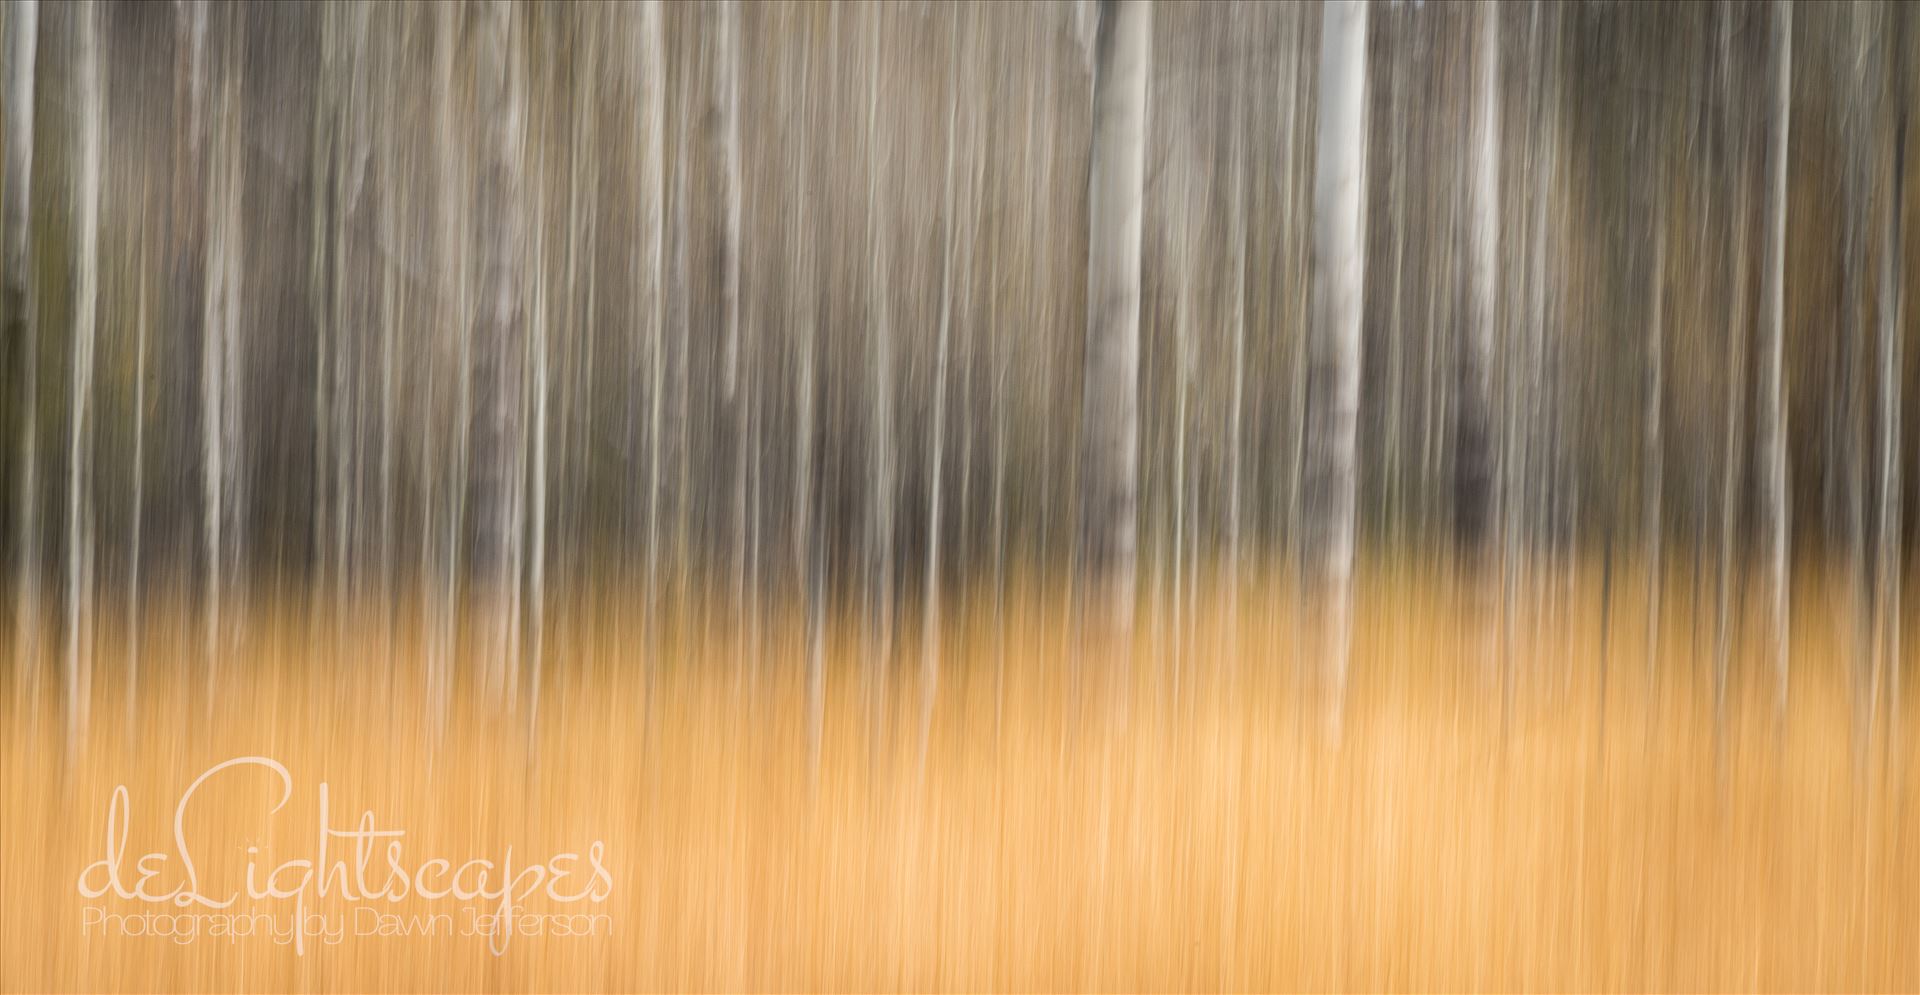 Bare Aspen - Intentional Camera Movement (ICM) - purposeful movement of the camera while the shutter is open causing intentional blurring of your subject. This is one of my favorite techniques for making dreamy abstracts. by Dawn Jefferson